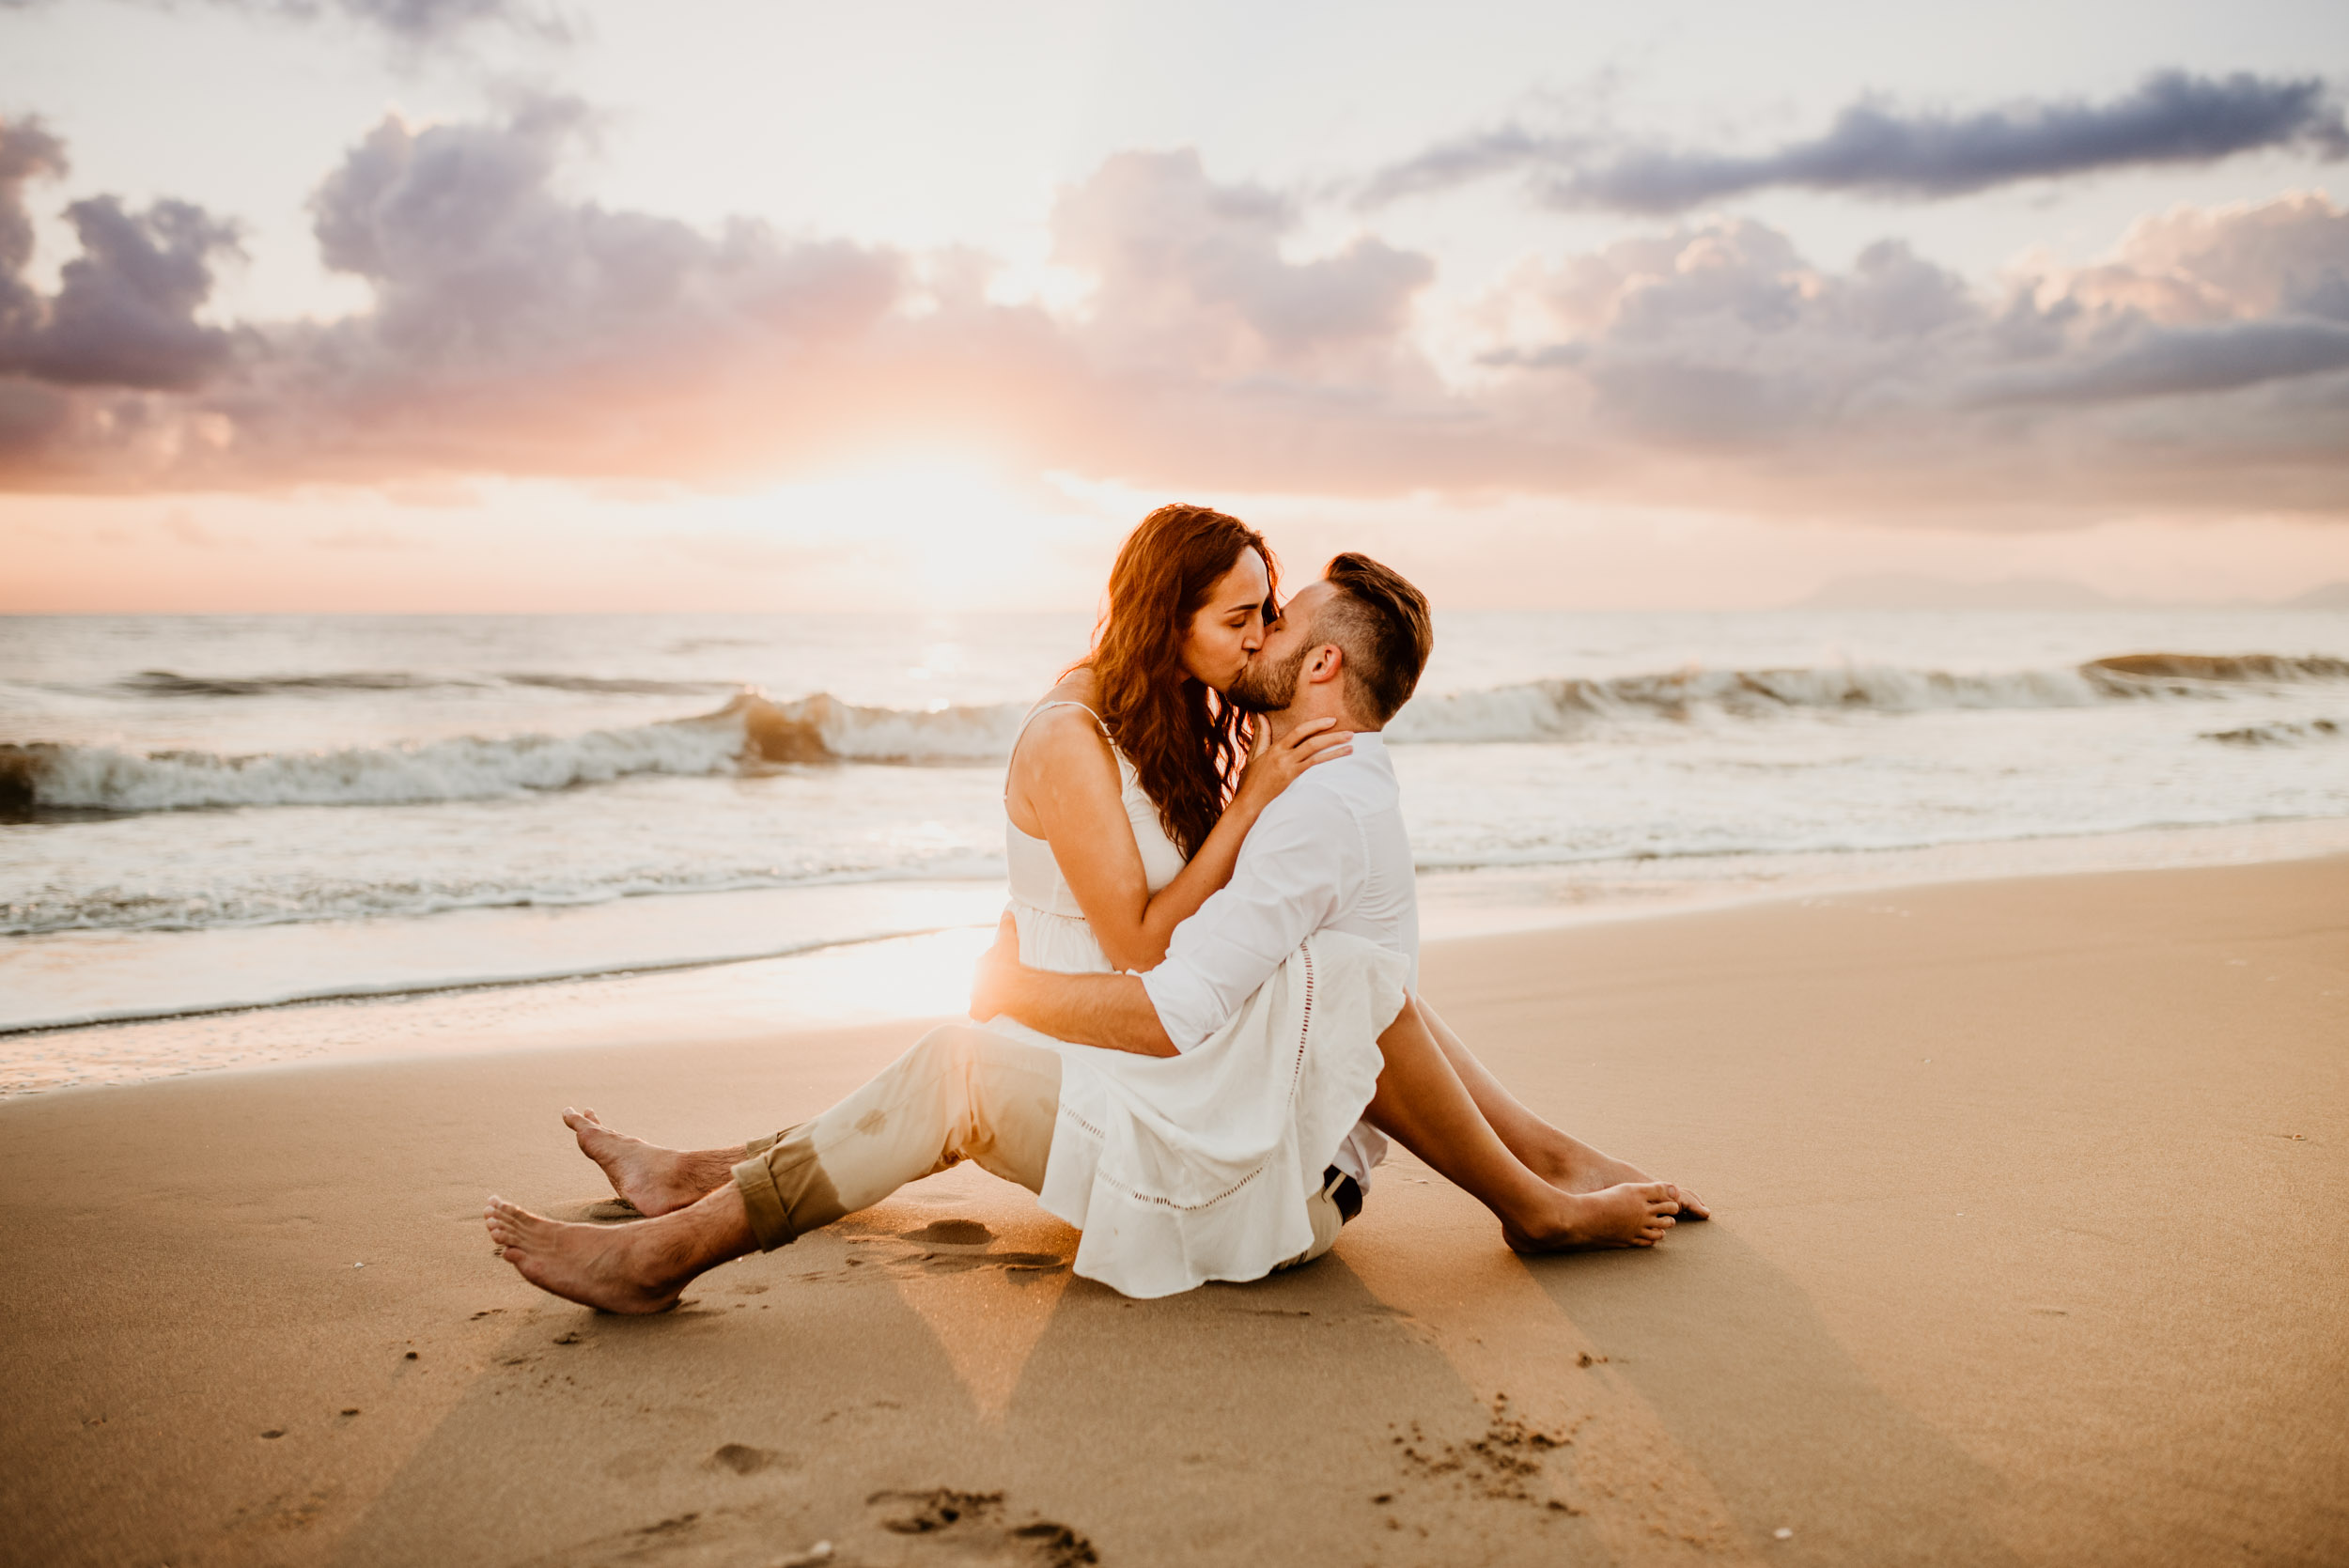 The Raw Photographer - Cairns Wedding Photographer - Engaged Engagement - Beach location - Candid Photography Queensland-16.jpg